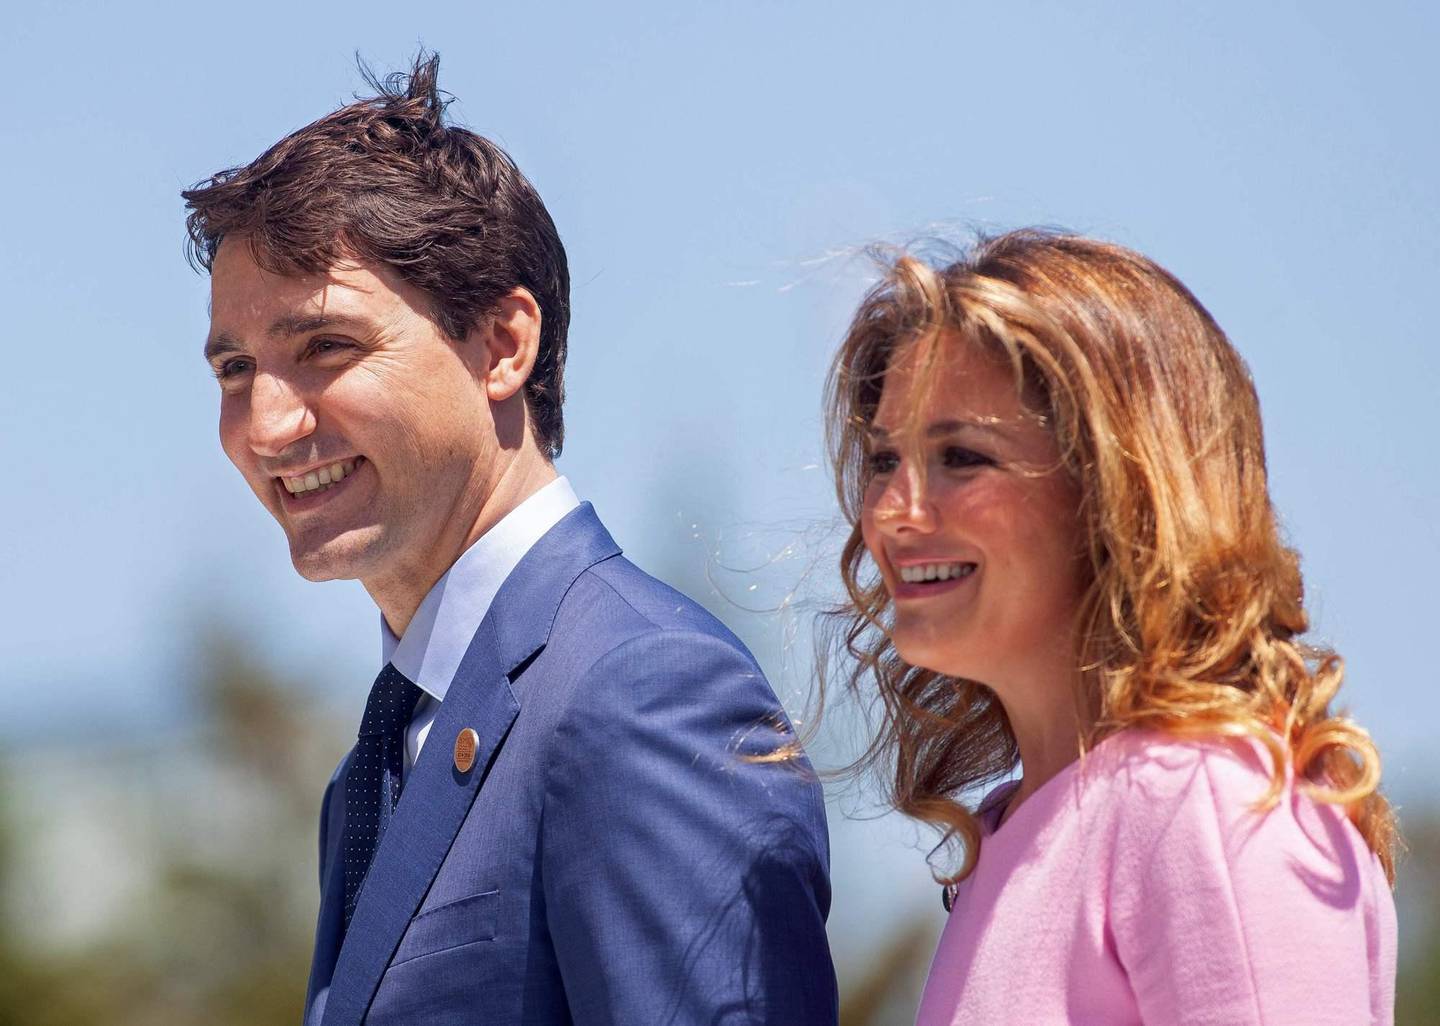 (FILES) In this file photo taken on June 08, 2018 Prime Minister of Canada Justin Trudeau and his wife Sophie Gregoire Trudeau arrive for a welcome ceremony for G7 leaders on the first day of the summit in La Malbaie, Quebec, Canada. - Some celebrities around the world are affected by the novel coronavirus. Canadian Prime Minister Justin Trudeau has been in quarantaine since March 13, 2020 and for two weeks, as his wife Sophie Gregoire Trudeau was tested positive. (Photo by GEOFF ROBINS / AFP)